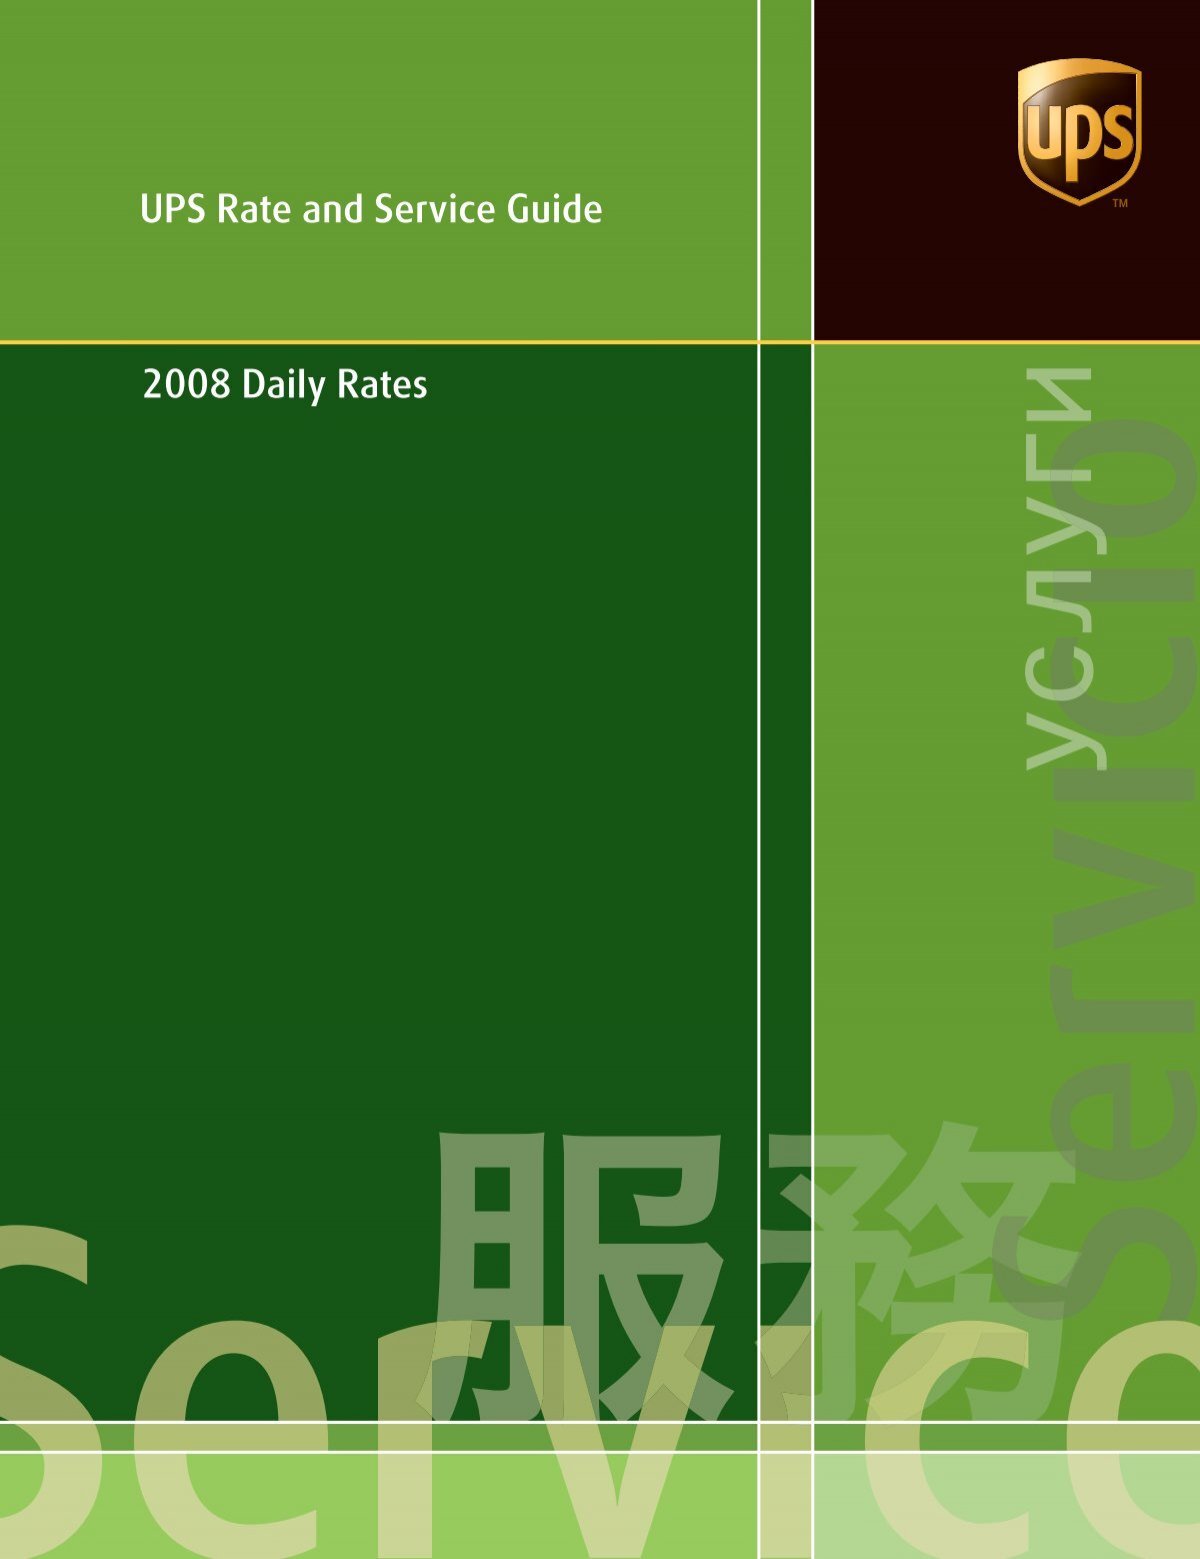 UPS Rate and Service Guide: 2008 Daily Rates